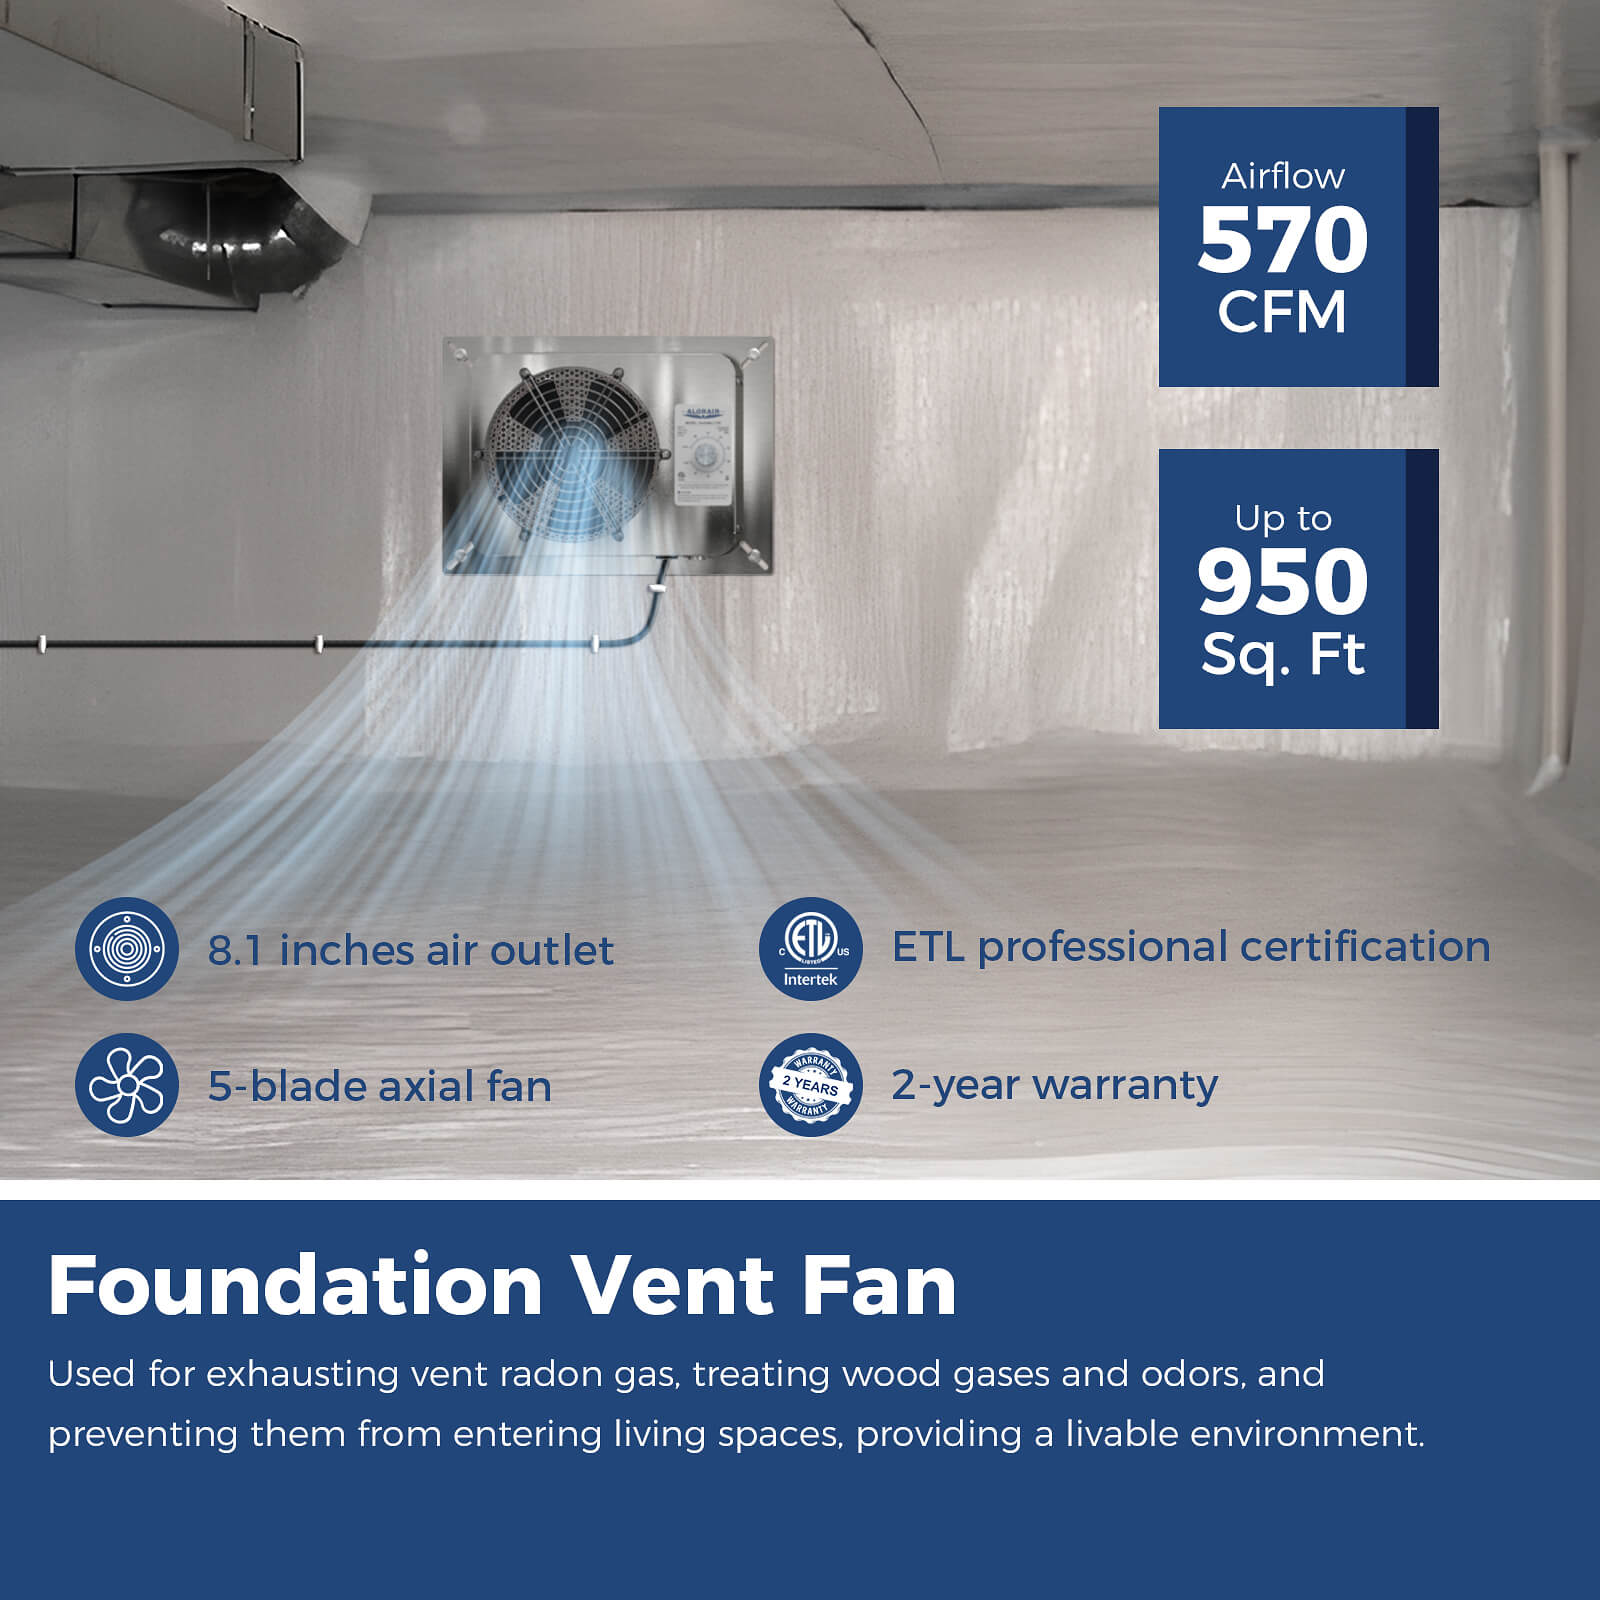 AlorAir 570CFM Stainless Steel Crawl Space Fan IP55 Rated Crawl Space Ventilation Fan with Thermostat, Built-In Isolation Net 8.1 Inch Foundation Vent Fan for Crawl Space, Basement, Garage, Attic, ETL AlorAir